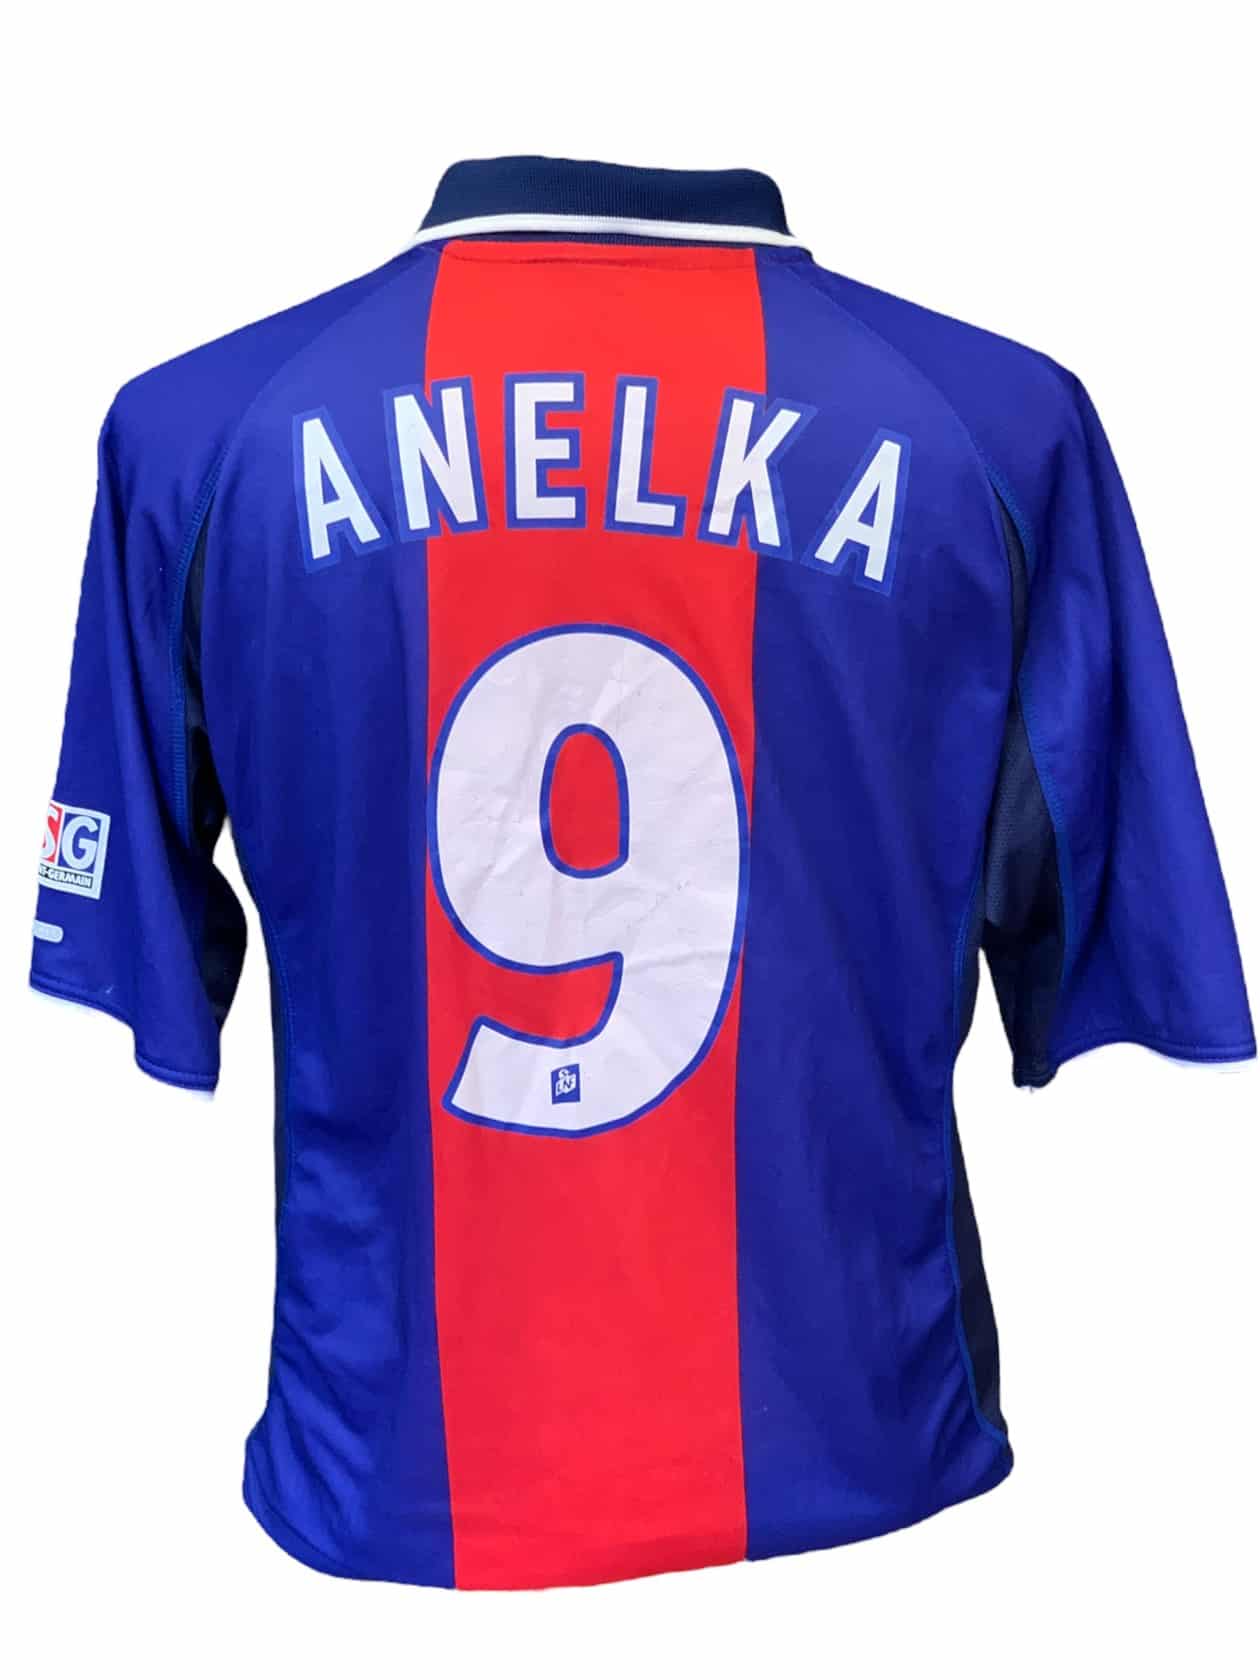 PSG Maillot Anelka 2000 2001 Home Replica Made in Italy Vintage